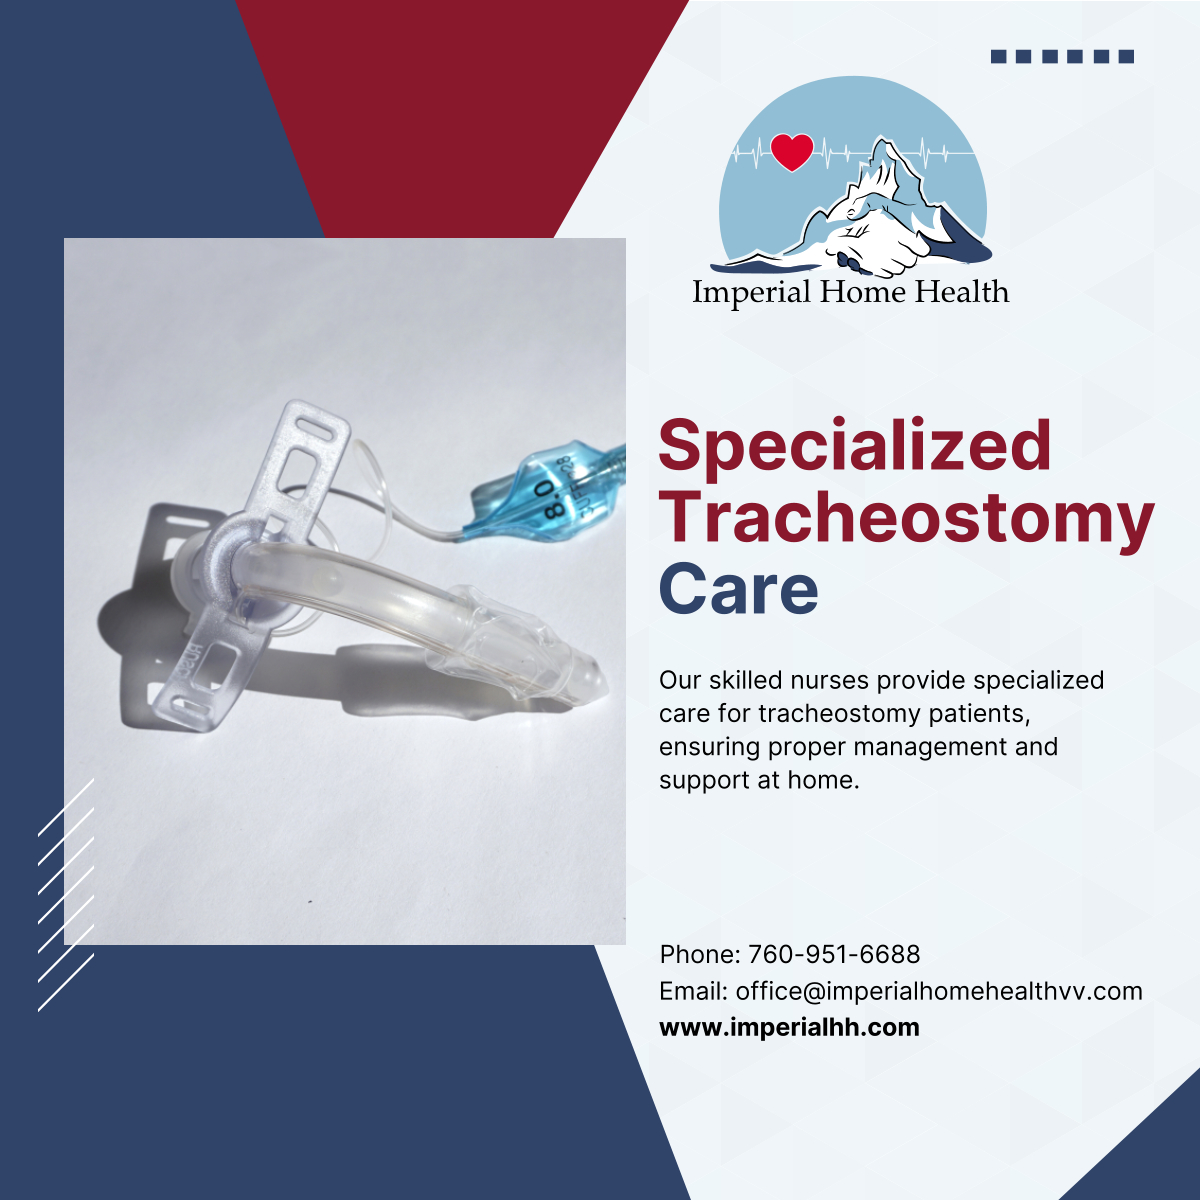 Trust our skilled nurses for specialized tracheostomy care in the comfort of your home. Contact us at 760-951-6688 for expert home health care services. 

#VictorvilleCA #HomeHealthcare #TracheostomyCare #RespiratoryHealth #HealthcareServices